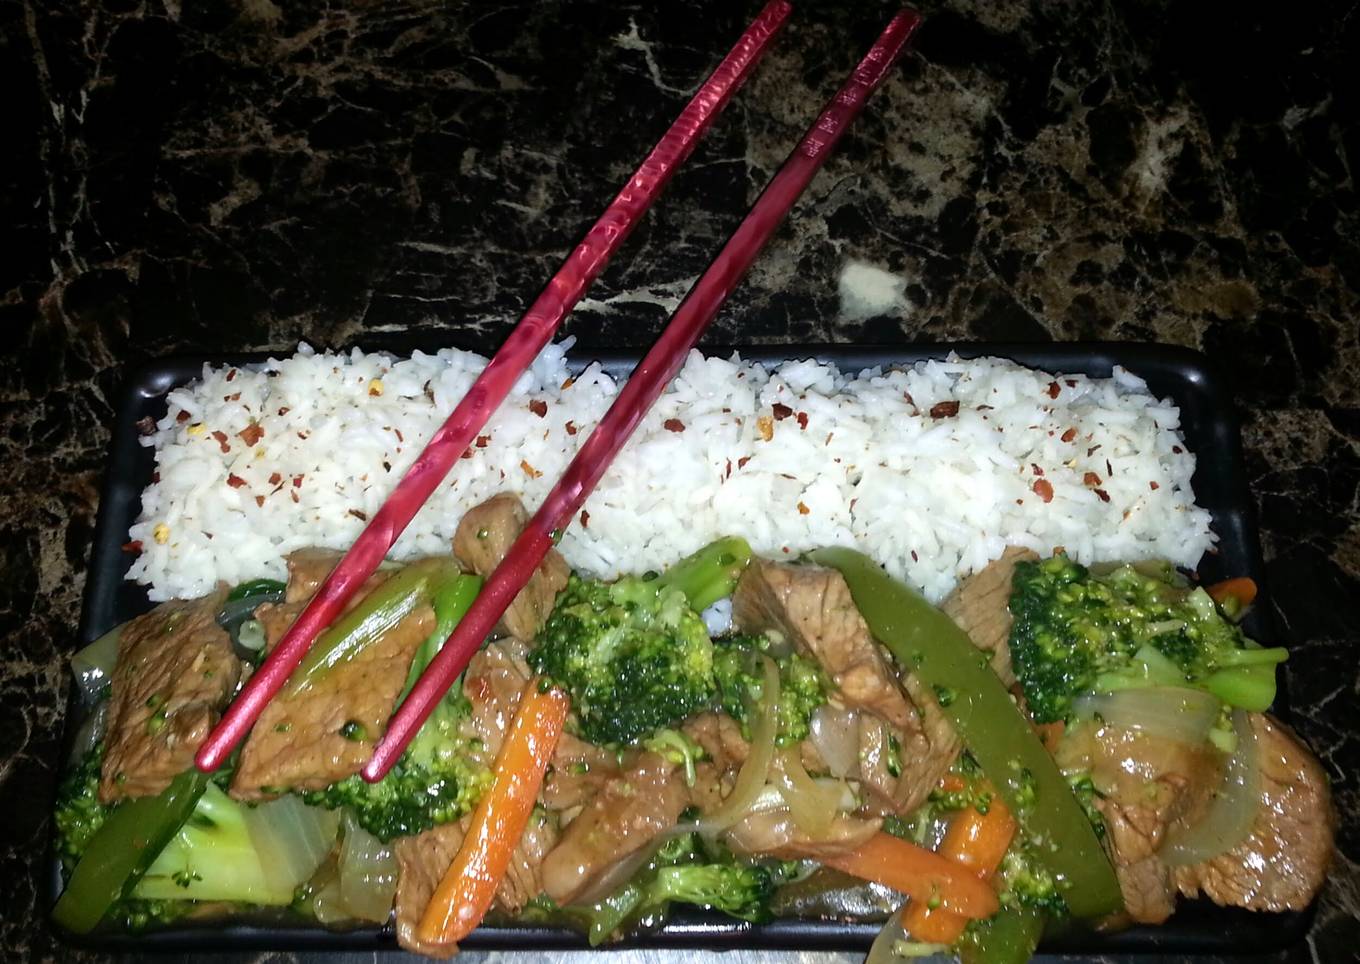 Mike's, "Everybody In The Pool!" Beef Stir Fry